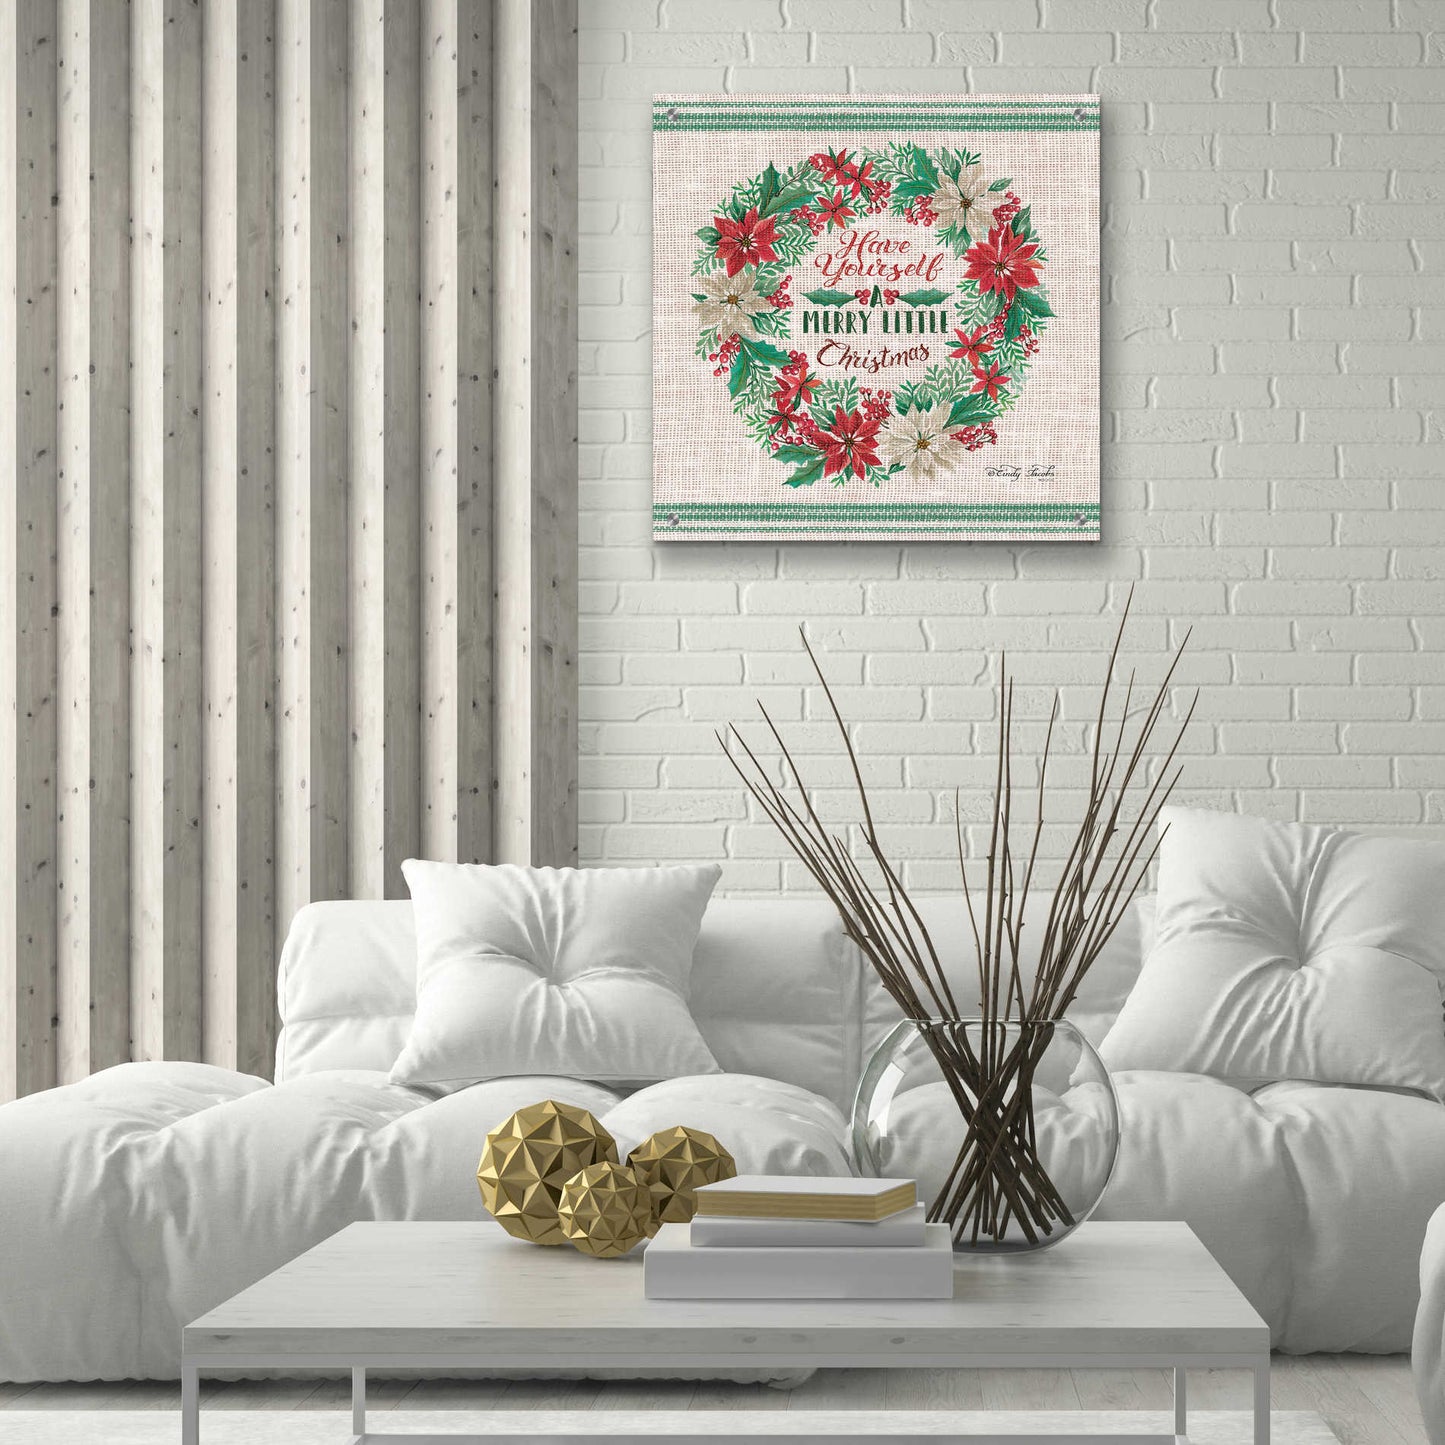 Epic Art 'Have Yourself a Merry Little Christmas Embroidery' by Cindy Jacobs, Acrylic Glass Wall Art,24x24